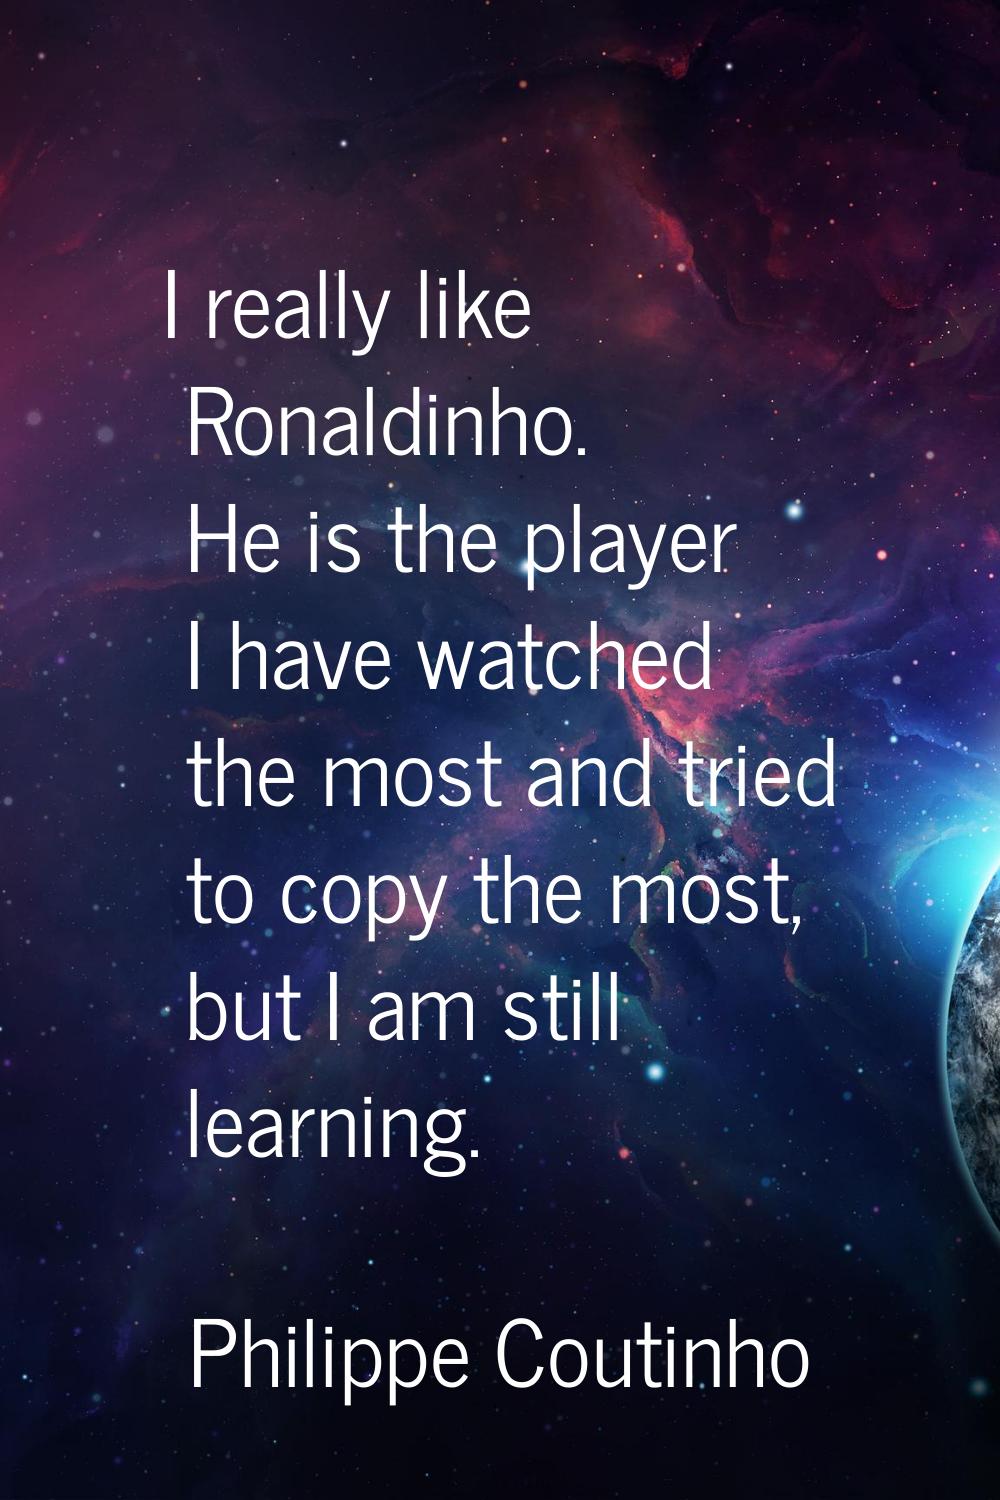 I really like Ronaldinho. He is the player I have watched the most and tried to copy the most, but 